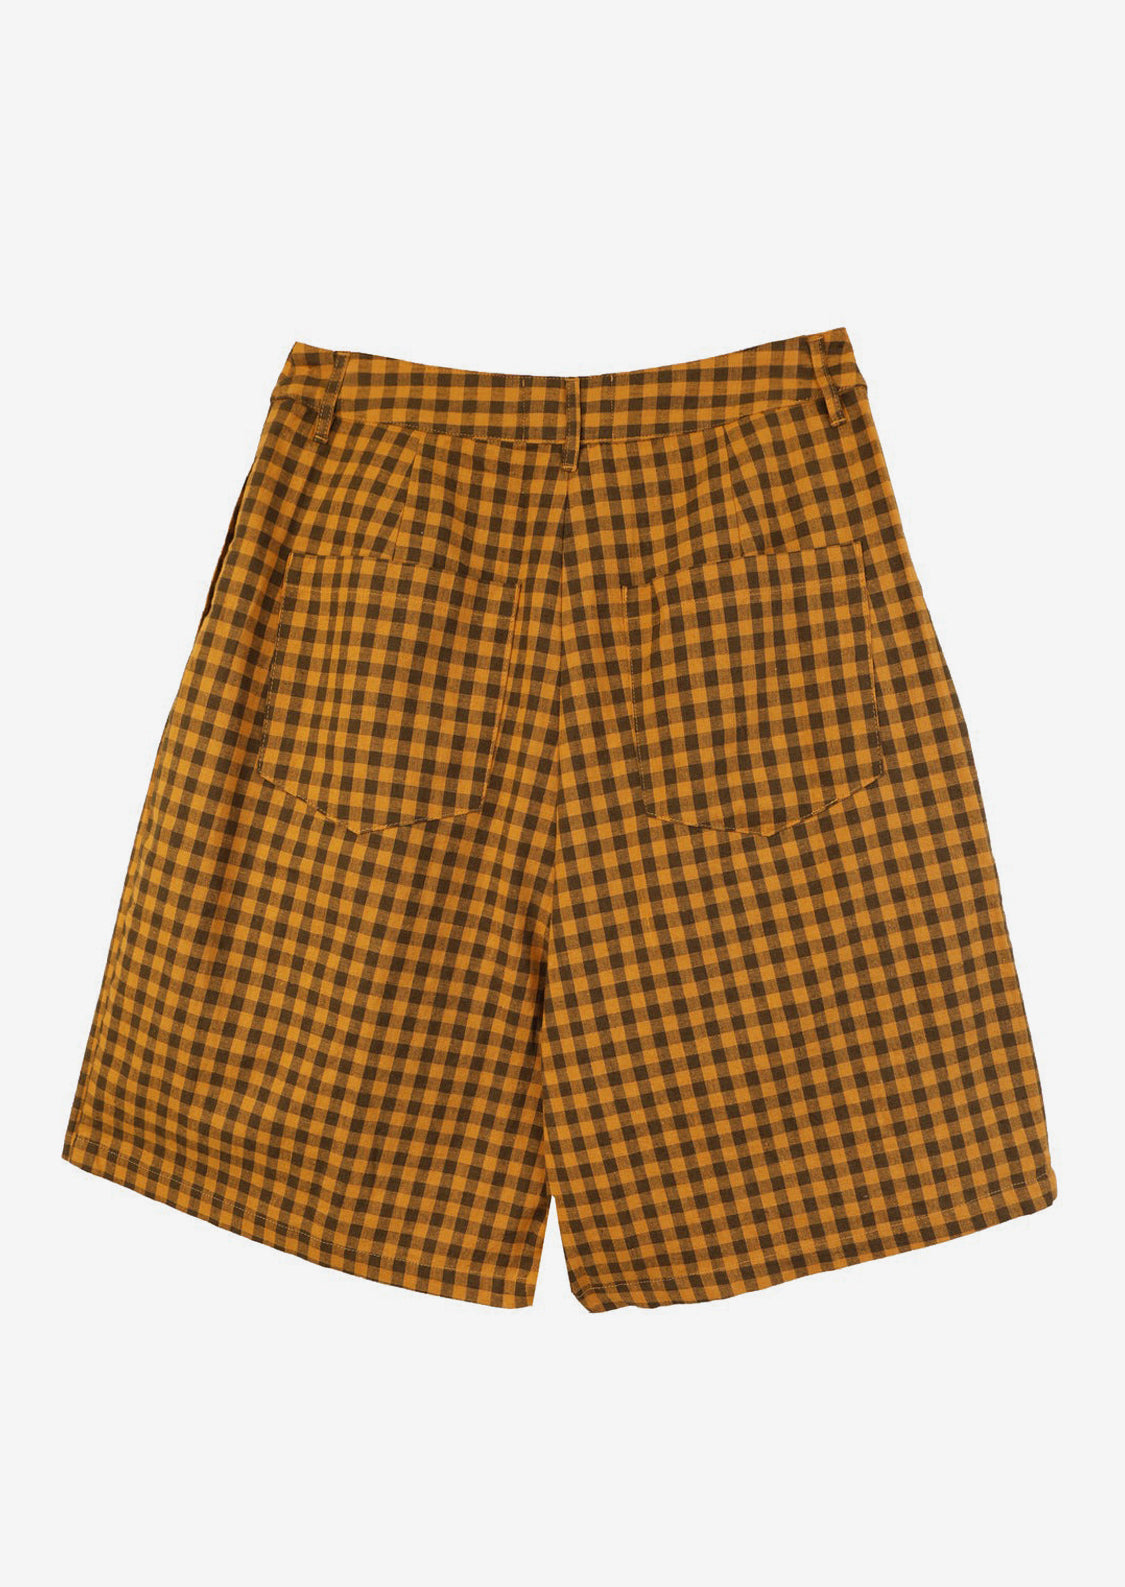 A pair of long, pleat front shorts in brown and mustard gingham.